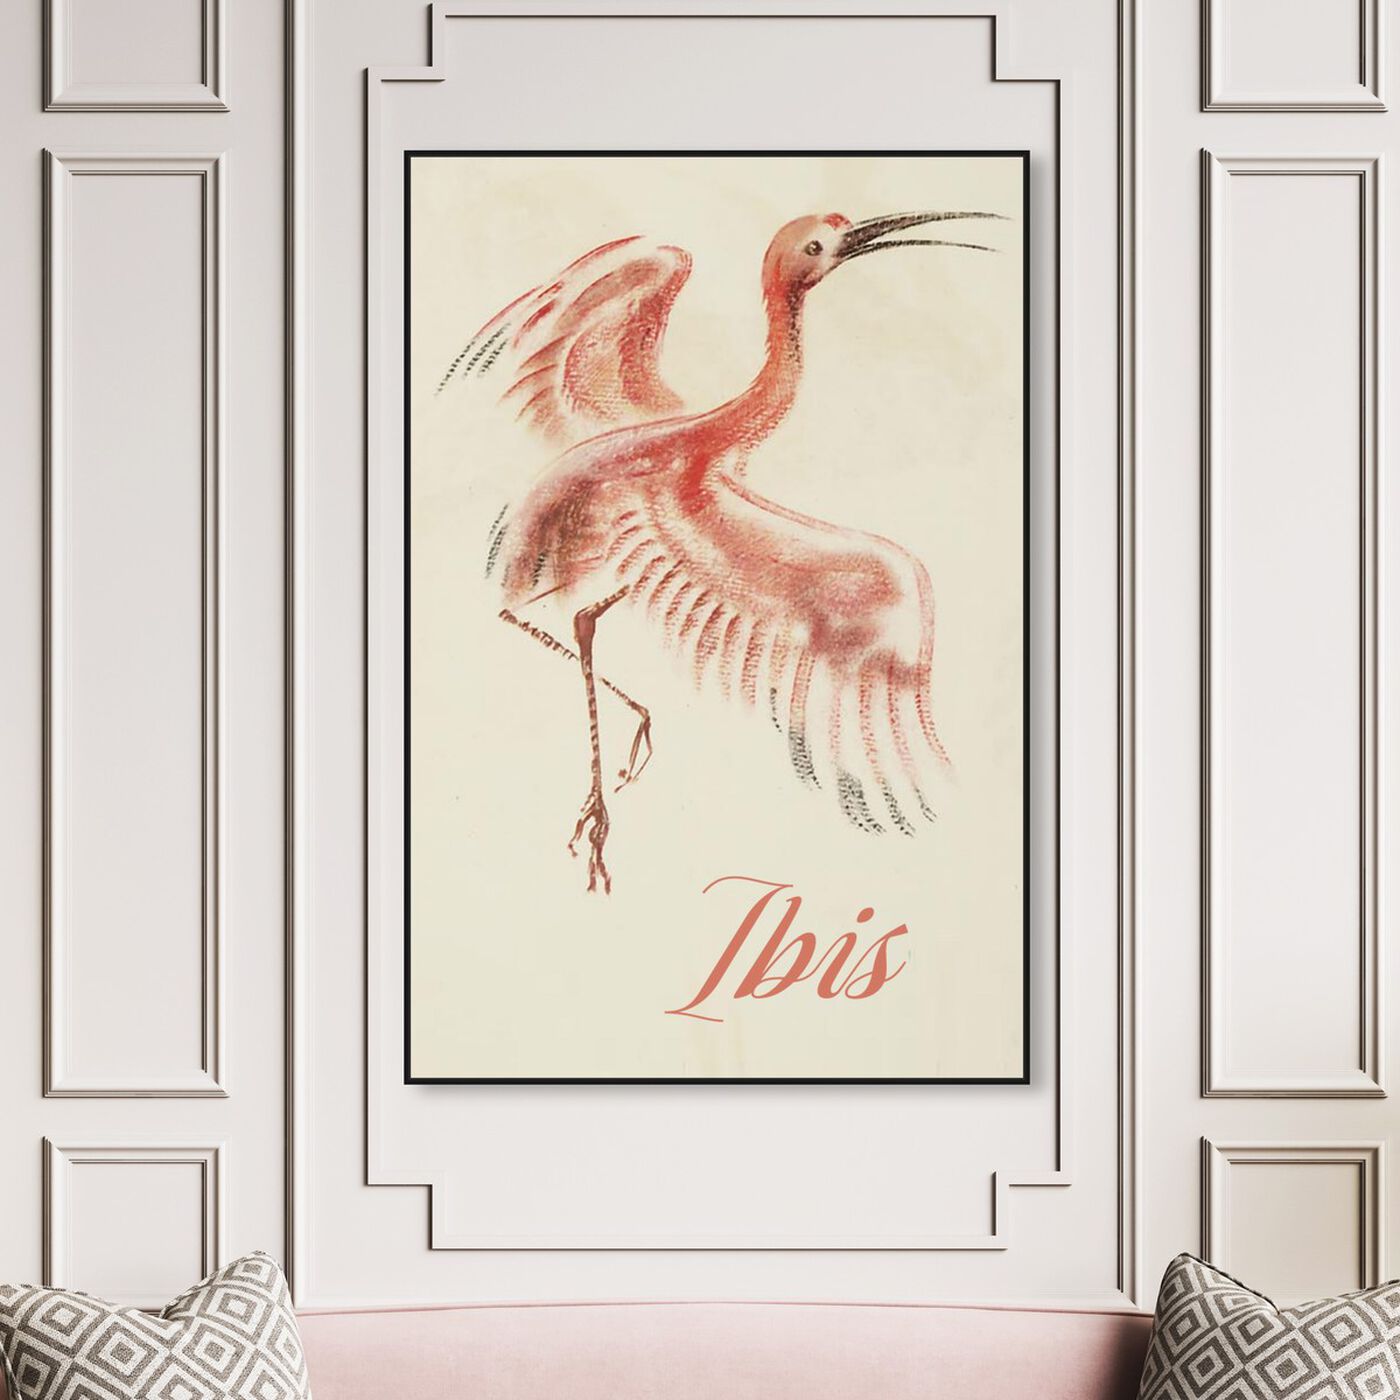 Hanging view of Ibis featuring animals and birds art.